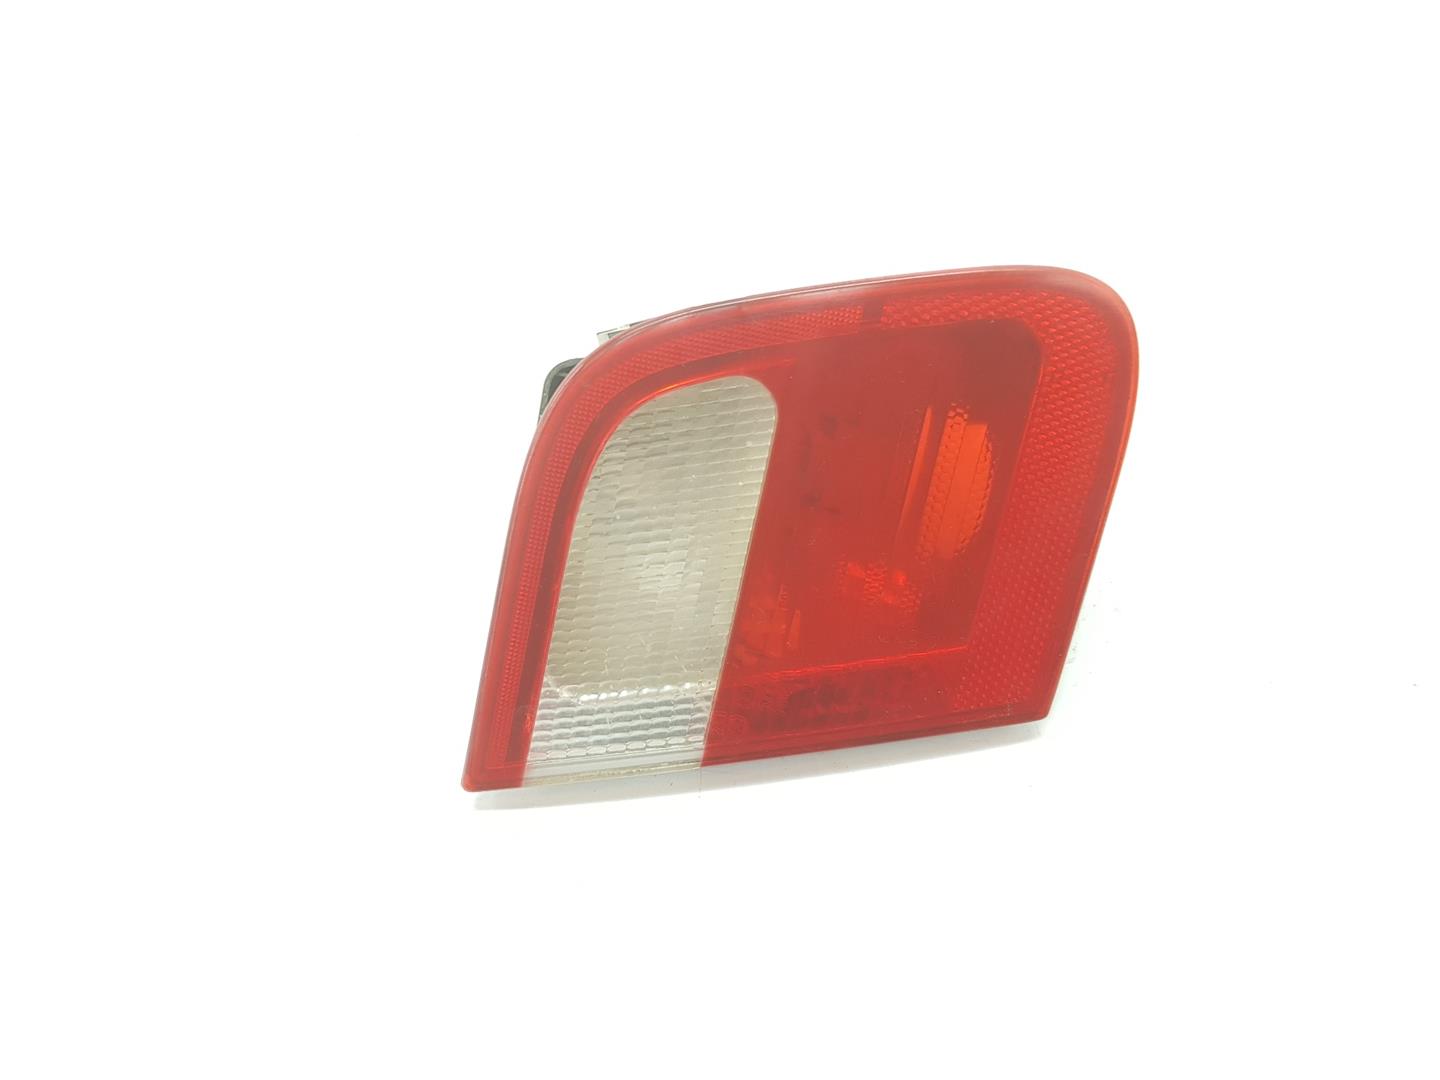 BMW 3 Series E46 (1997-2006) Rear Left Taillight 63218364923, 63218364923 24156978